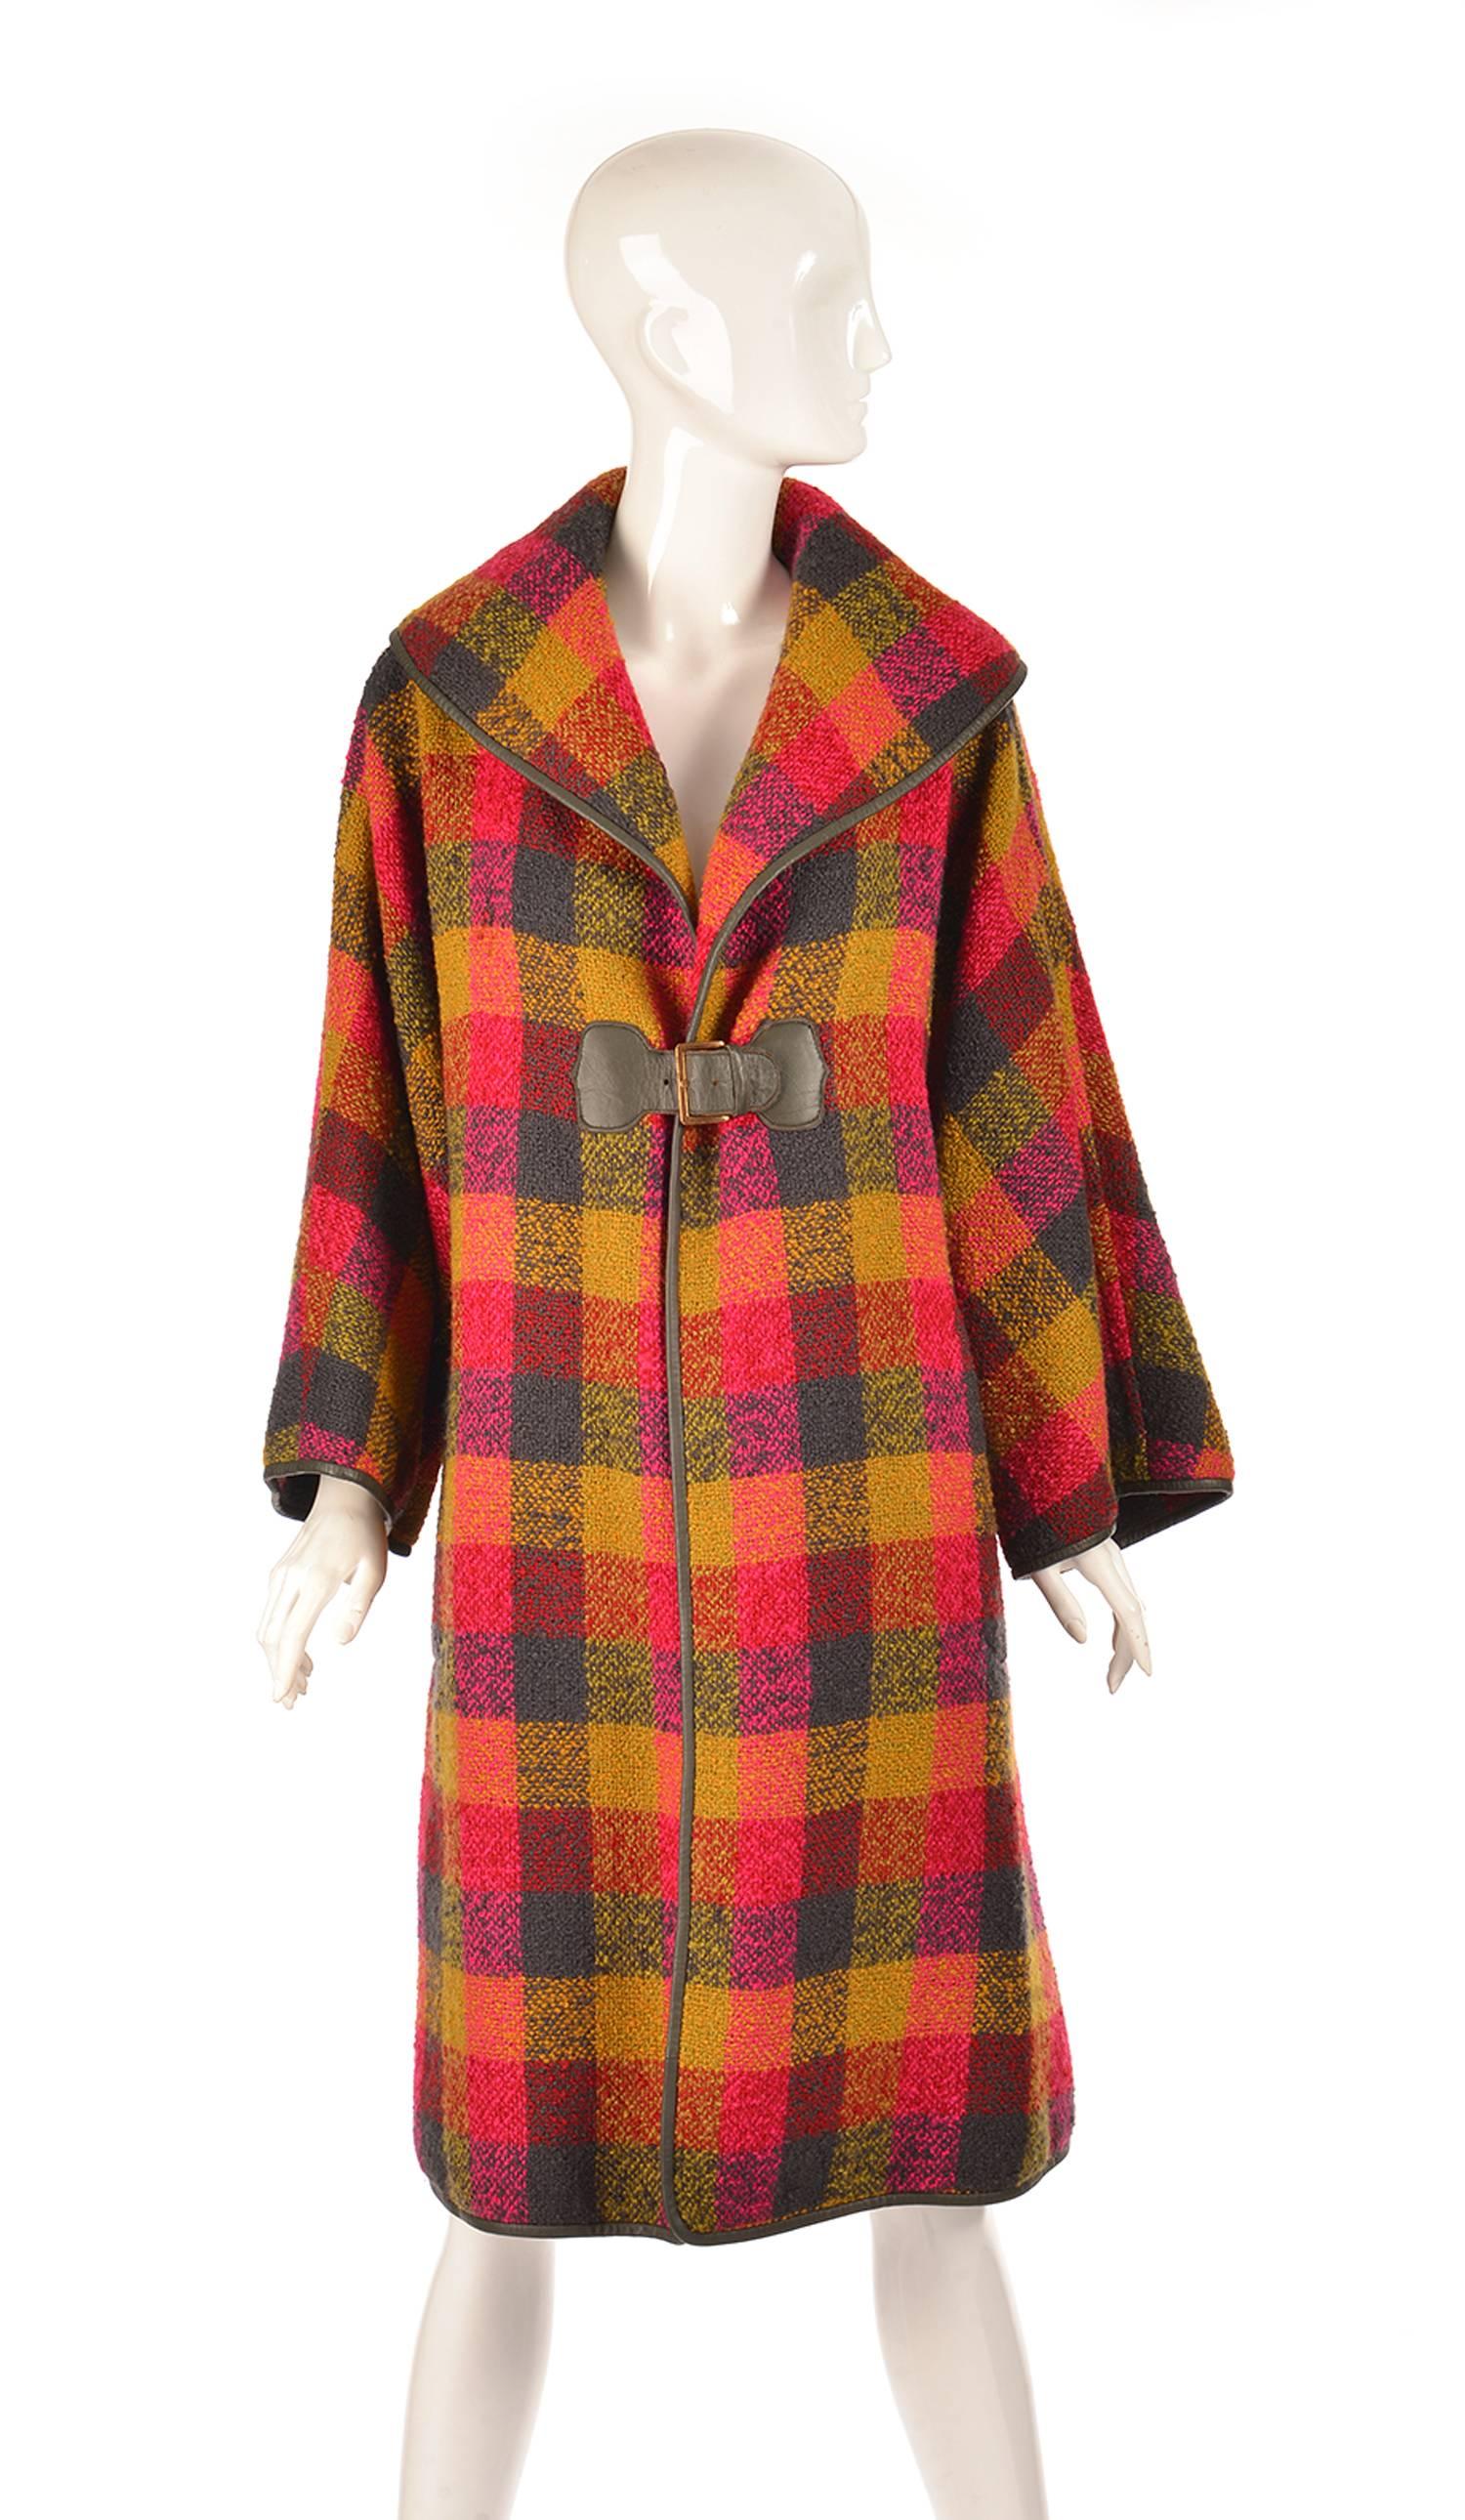 Gorgeous knee-length Bonnie Cashin coat in bright and festive fall colours. This gingham coat features pewter leather trim and a single buckle closure below the lapel. A striking and comfy addition to your closet!

Makes for a great gift for any